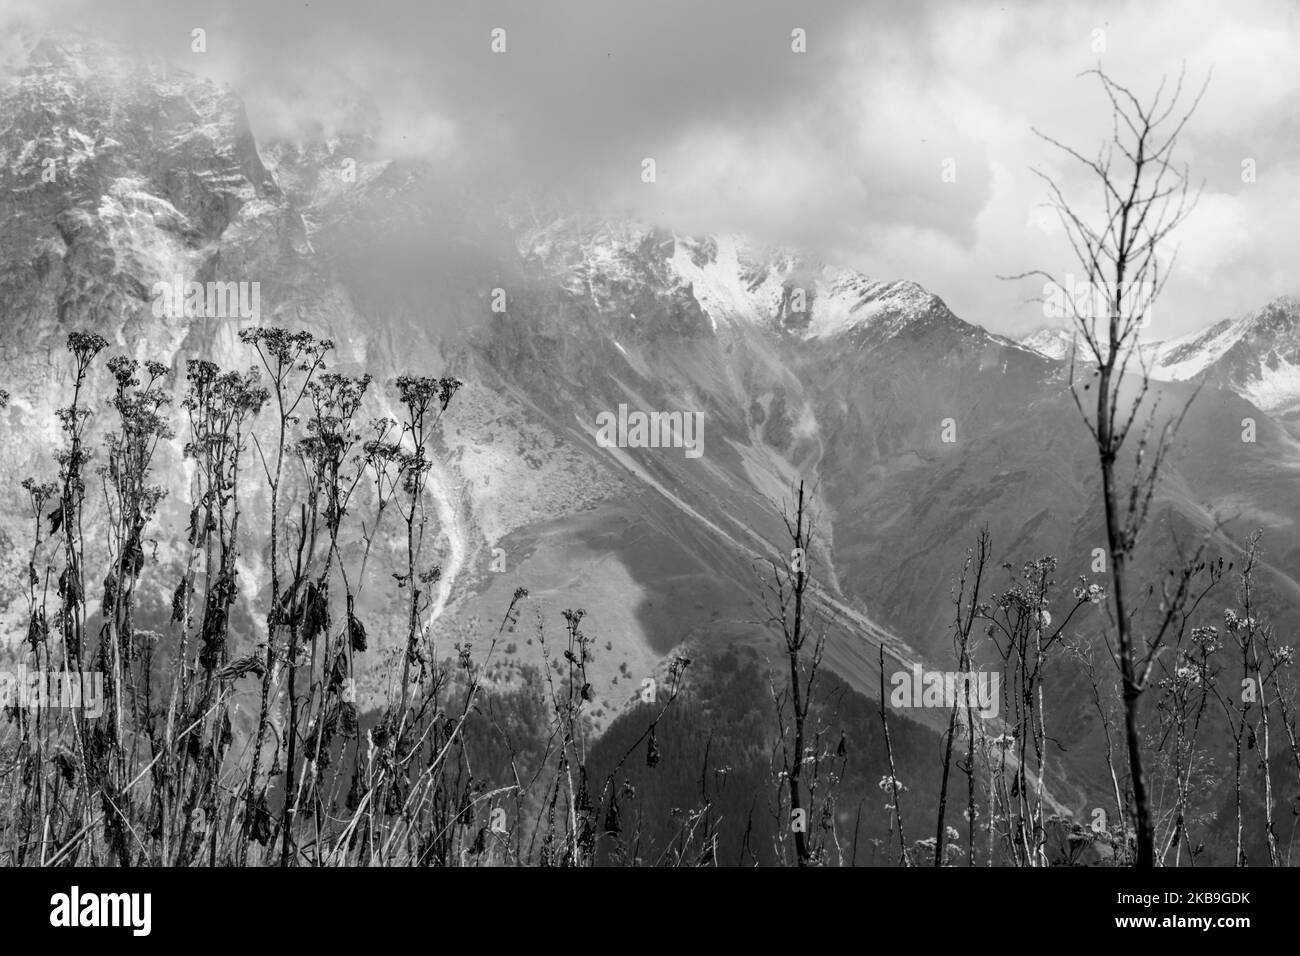 (EDITOR'S NOTE: This image has been converted to black and white.) Landscape near Mestia, the capital of Svaneti region of Georgia on September 27, 2019. Svaneti is situated in Central Caucasus Mountains surrounded by 3000-5000 peaks, it is inhabited by Svans ethnic subgroup of Georgia. (Photo by Dominika Zarzycka/NurPhoto) Stock Photo